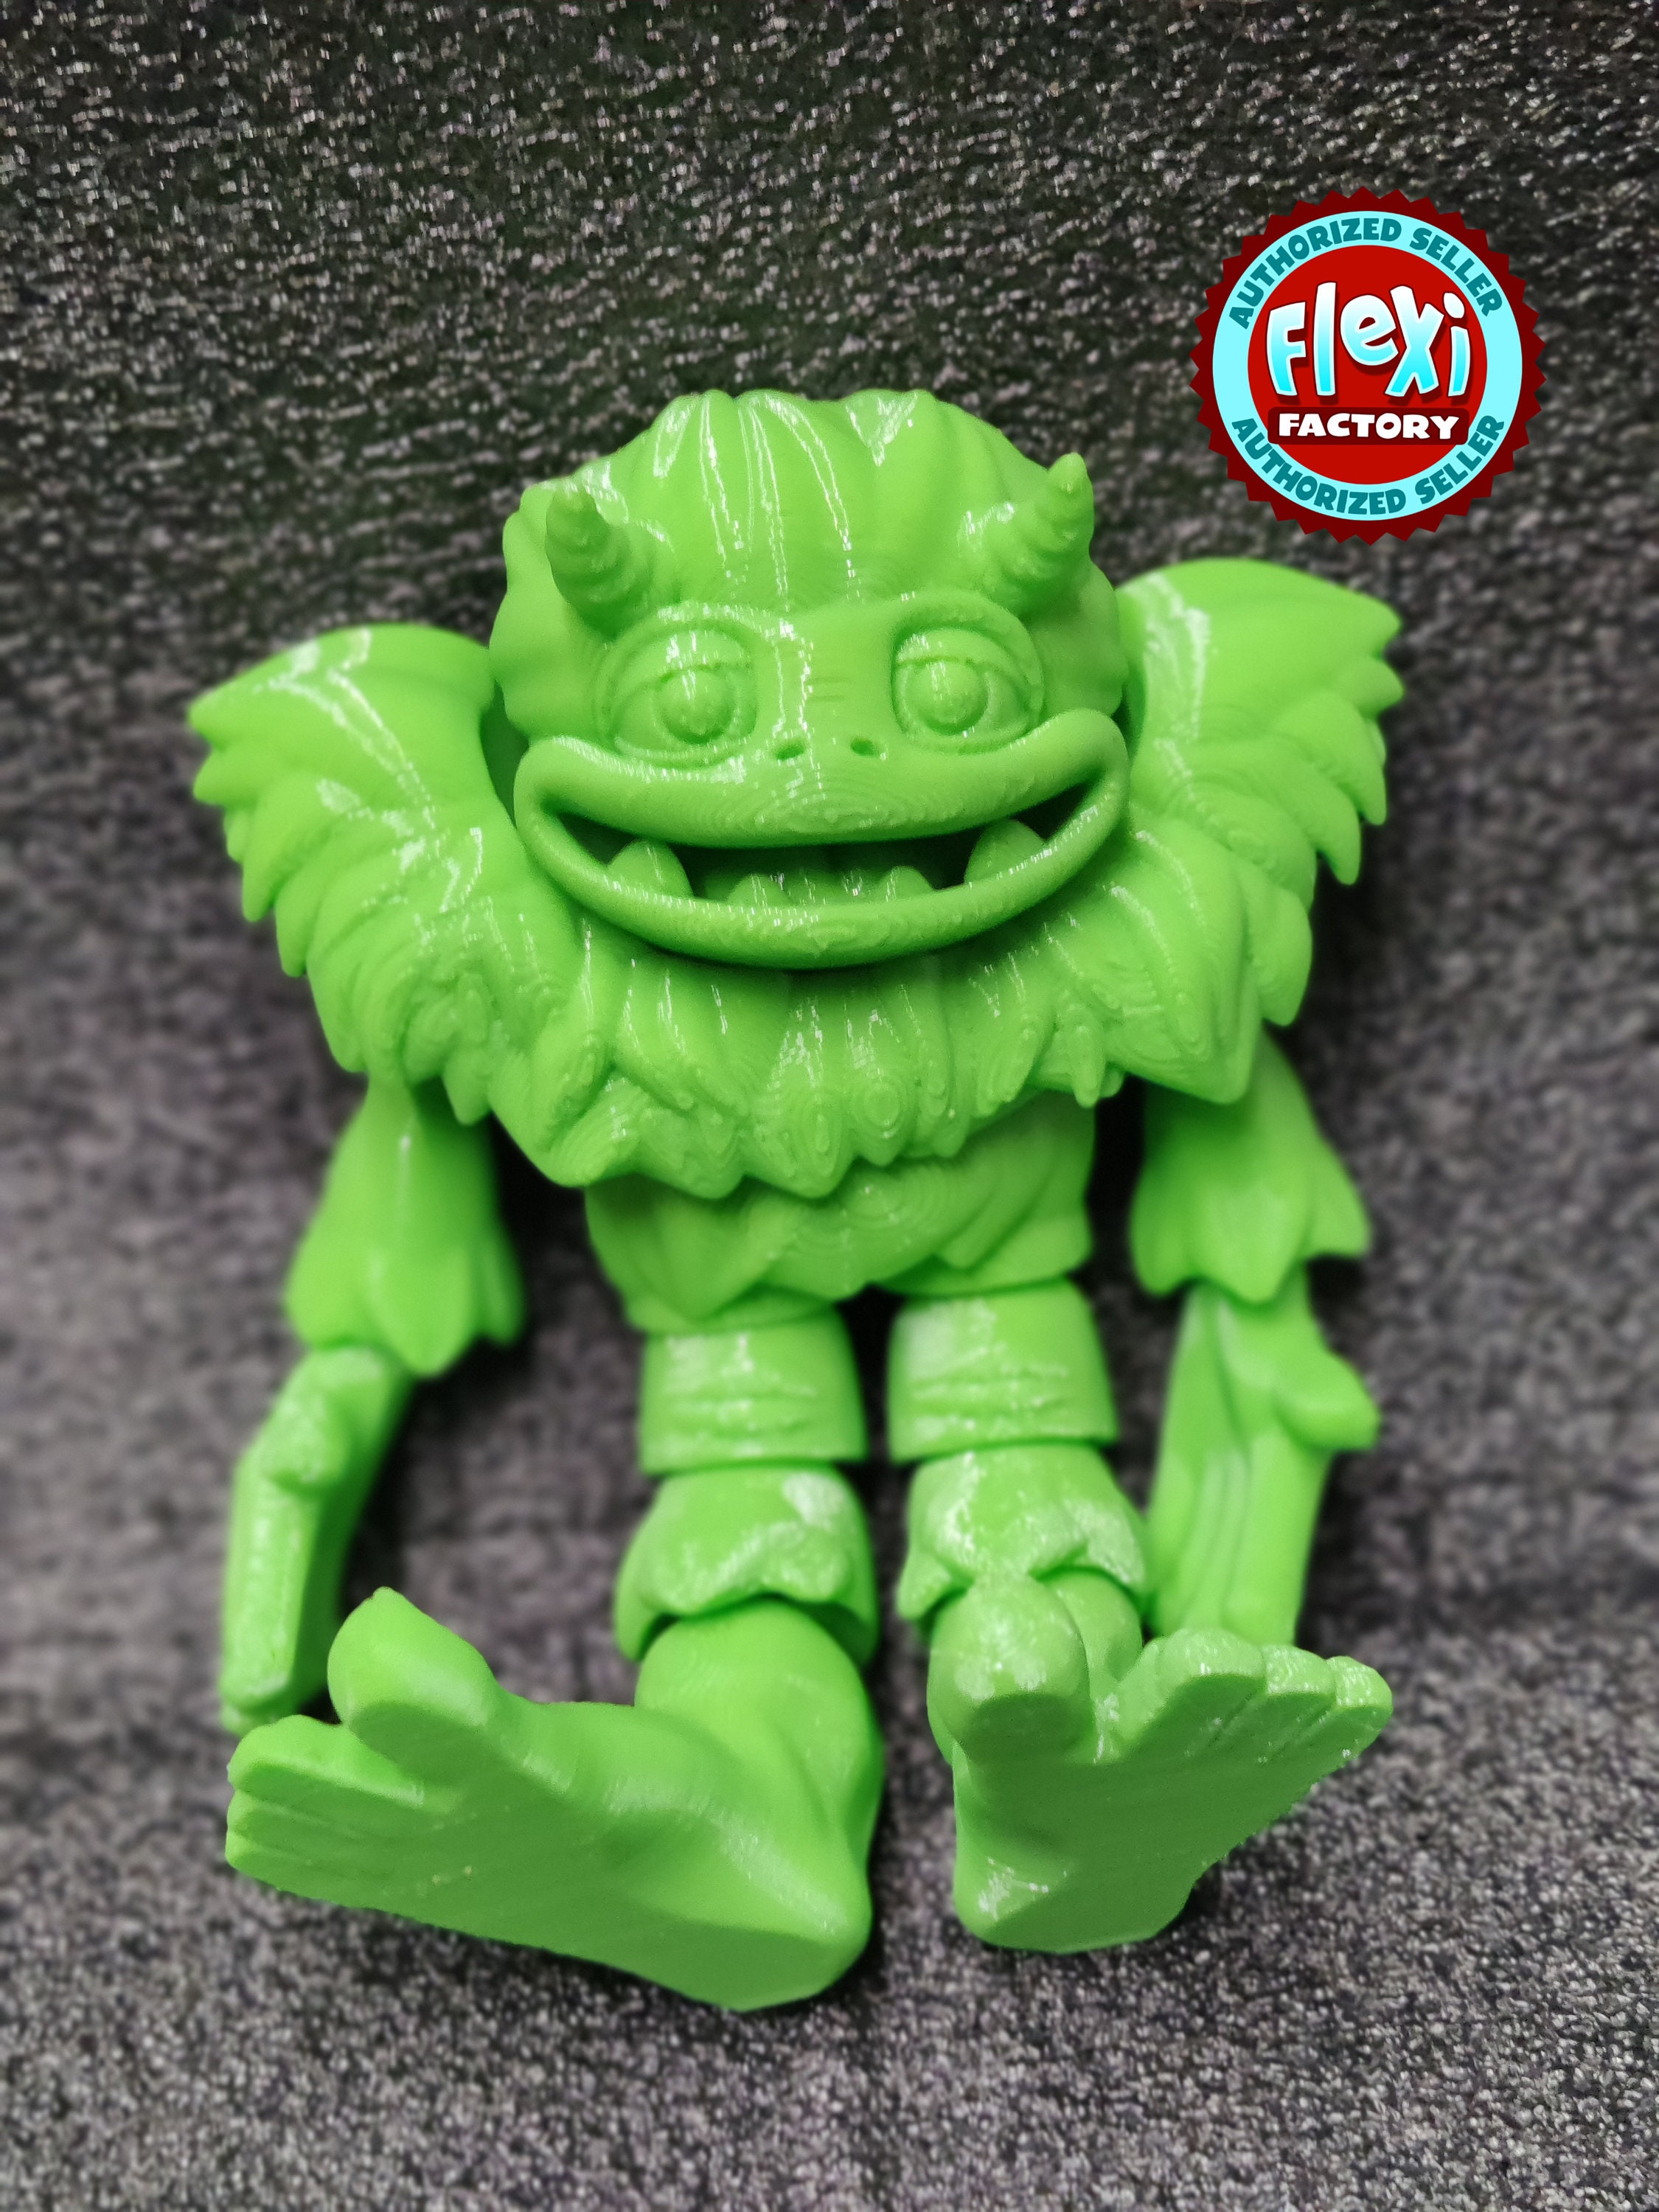 Articulated Yeti Set, Flexible Yeti Toy, Flexi Factory Authorized Reseller,  Fun Toy for Kids 